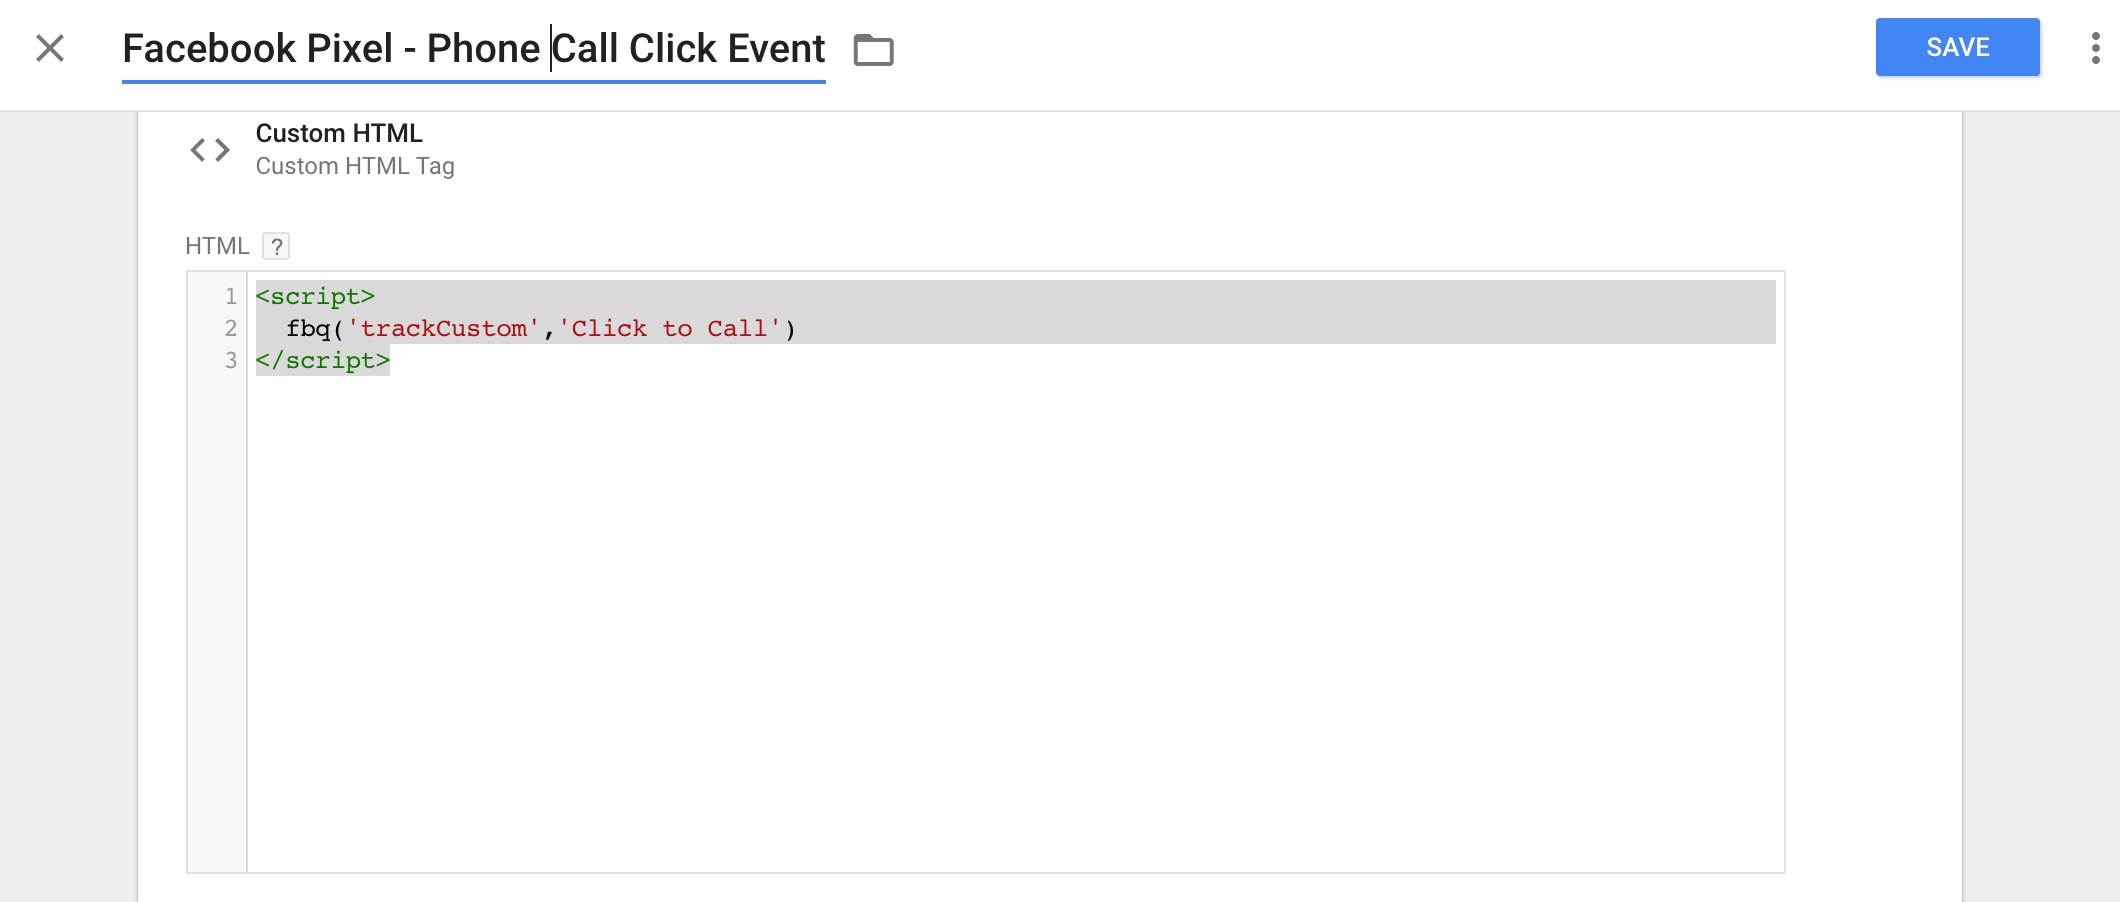 Implementing Facebook Events in GTM